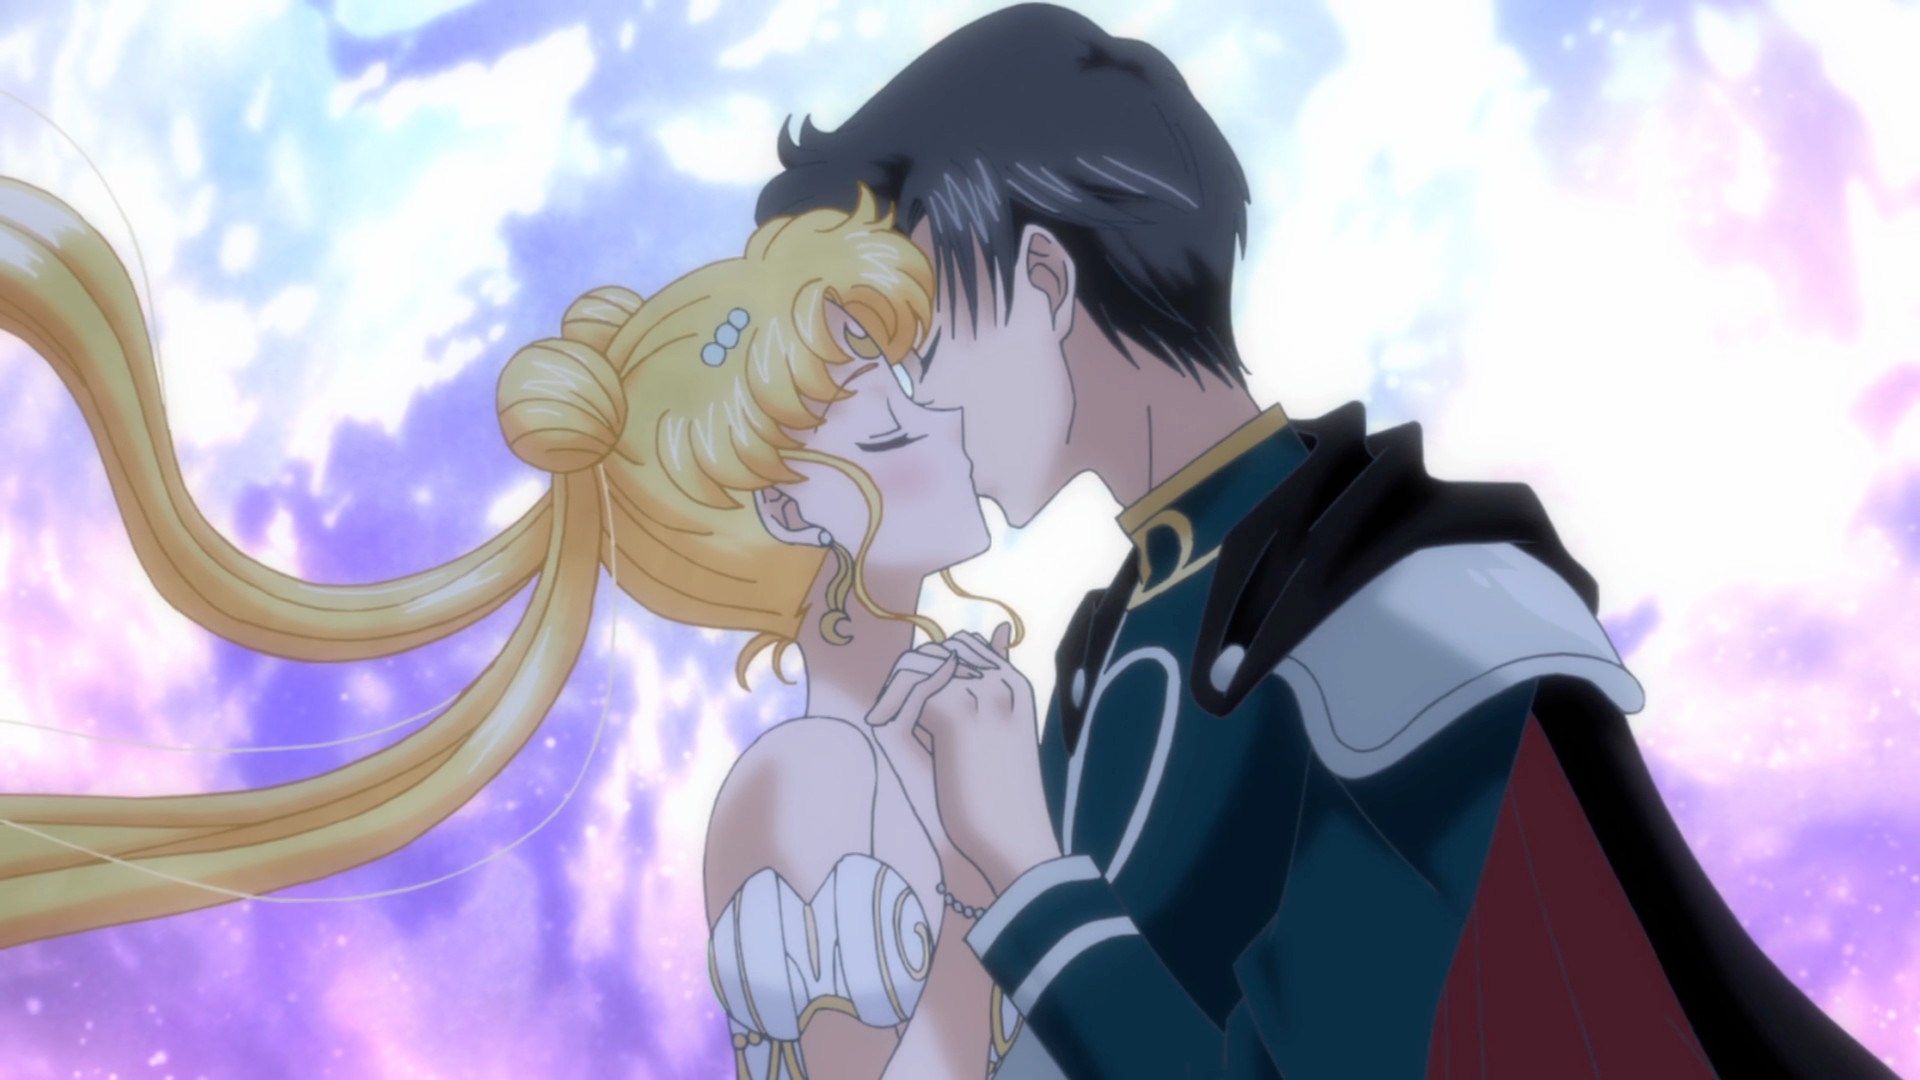 Sailor Moon and Tuxedo Mask share a kiss in the new trailer for the upcoming Sailor Moon Eternal film. - Sailor Moon